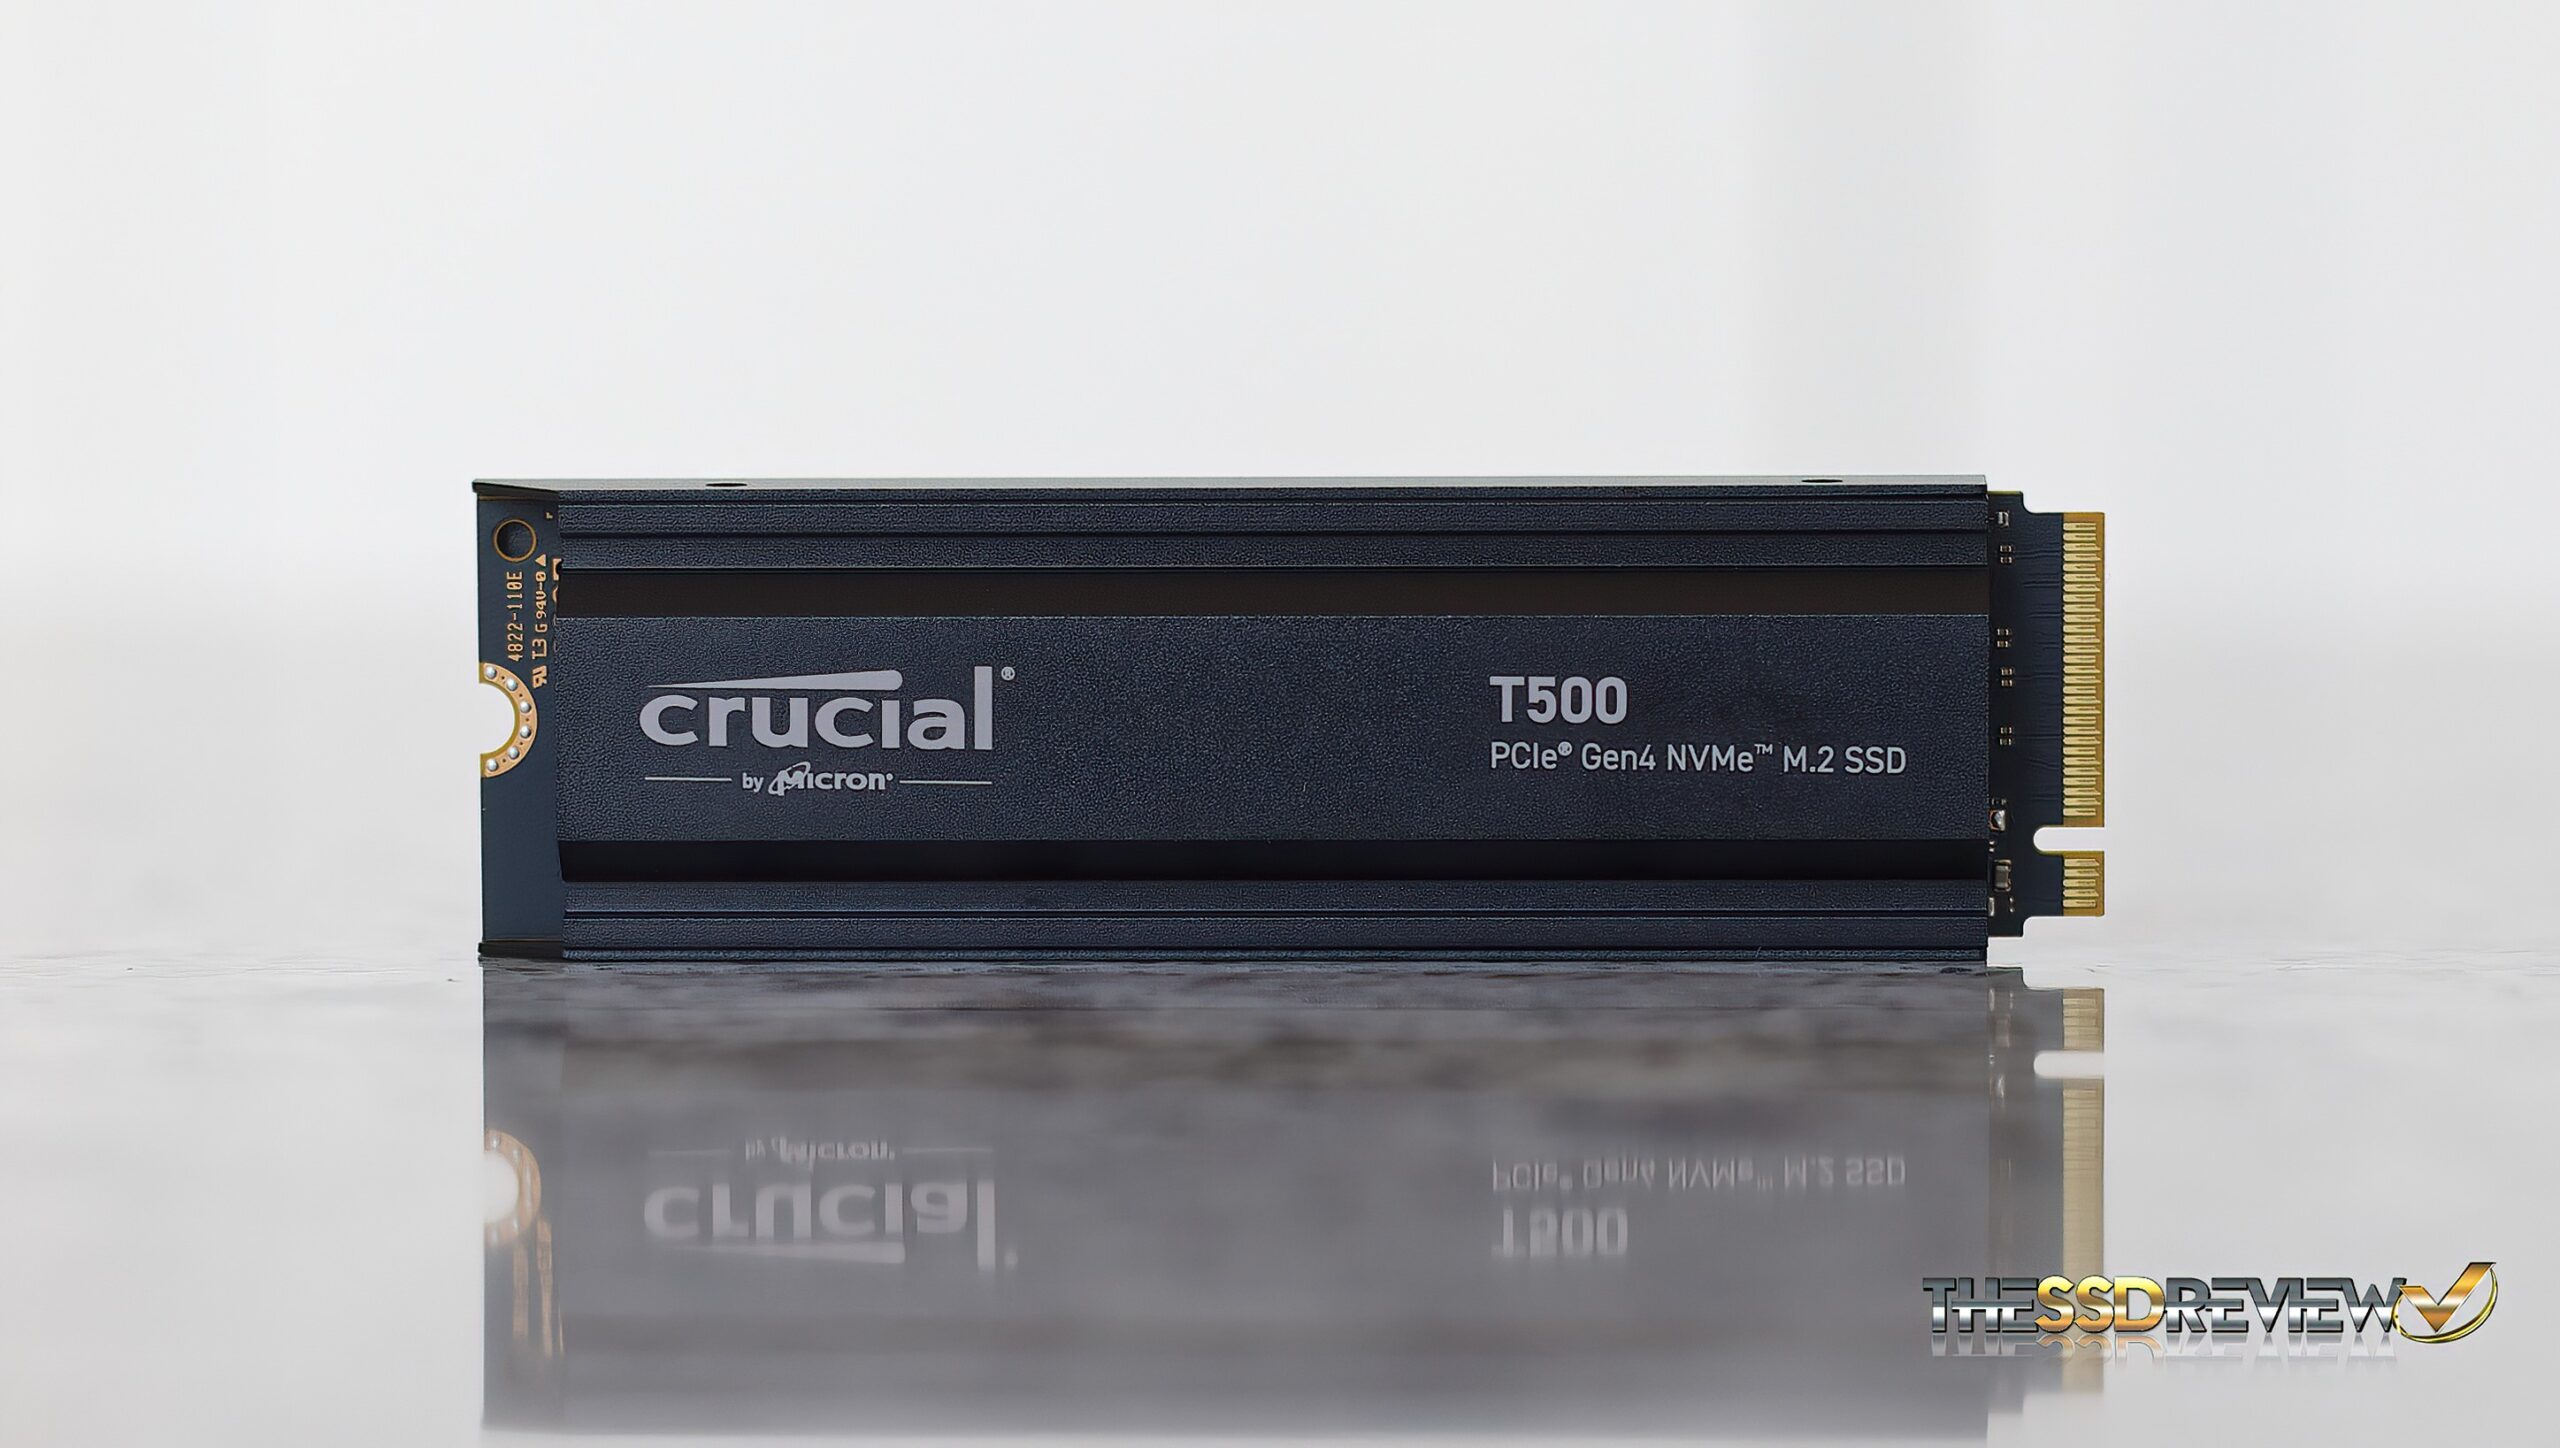 Crucial T500 PRO 2TB PCIe Gen4 NVMe SSD Review